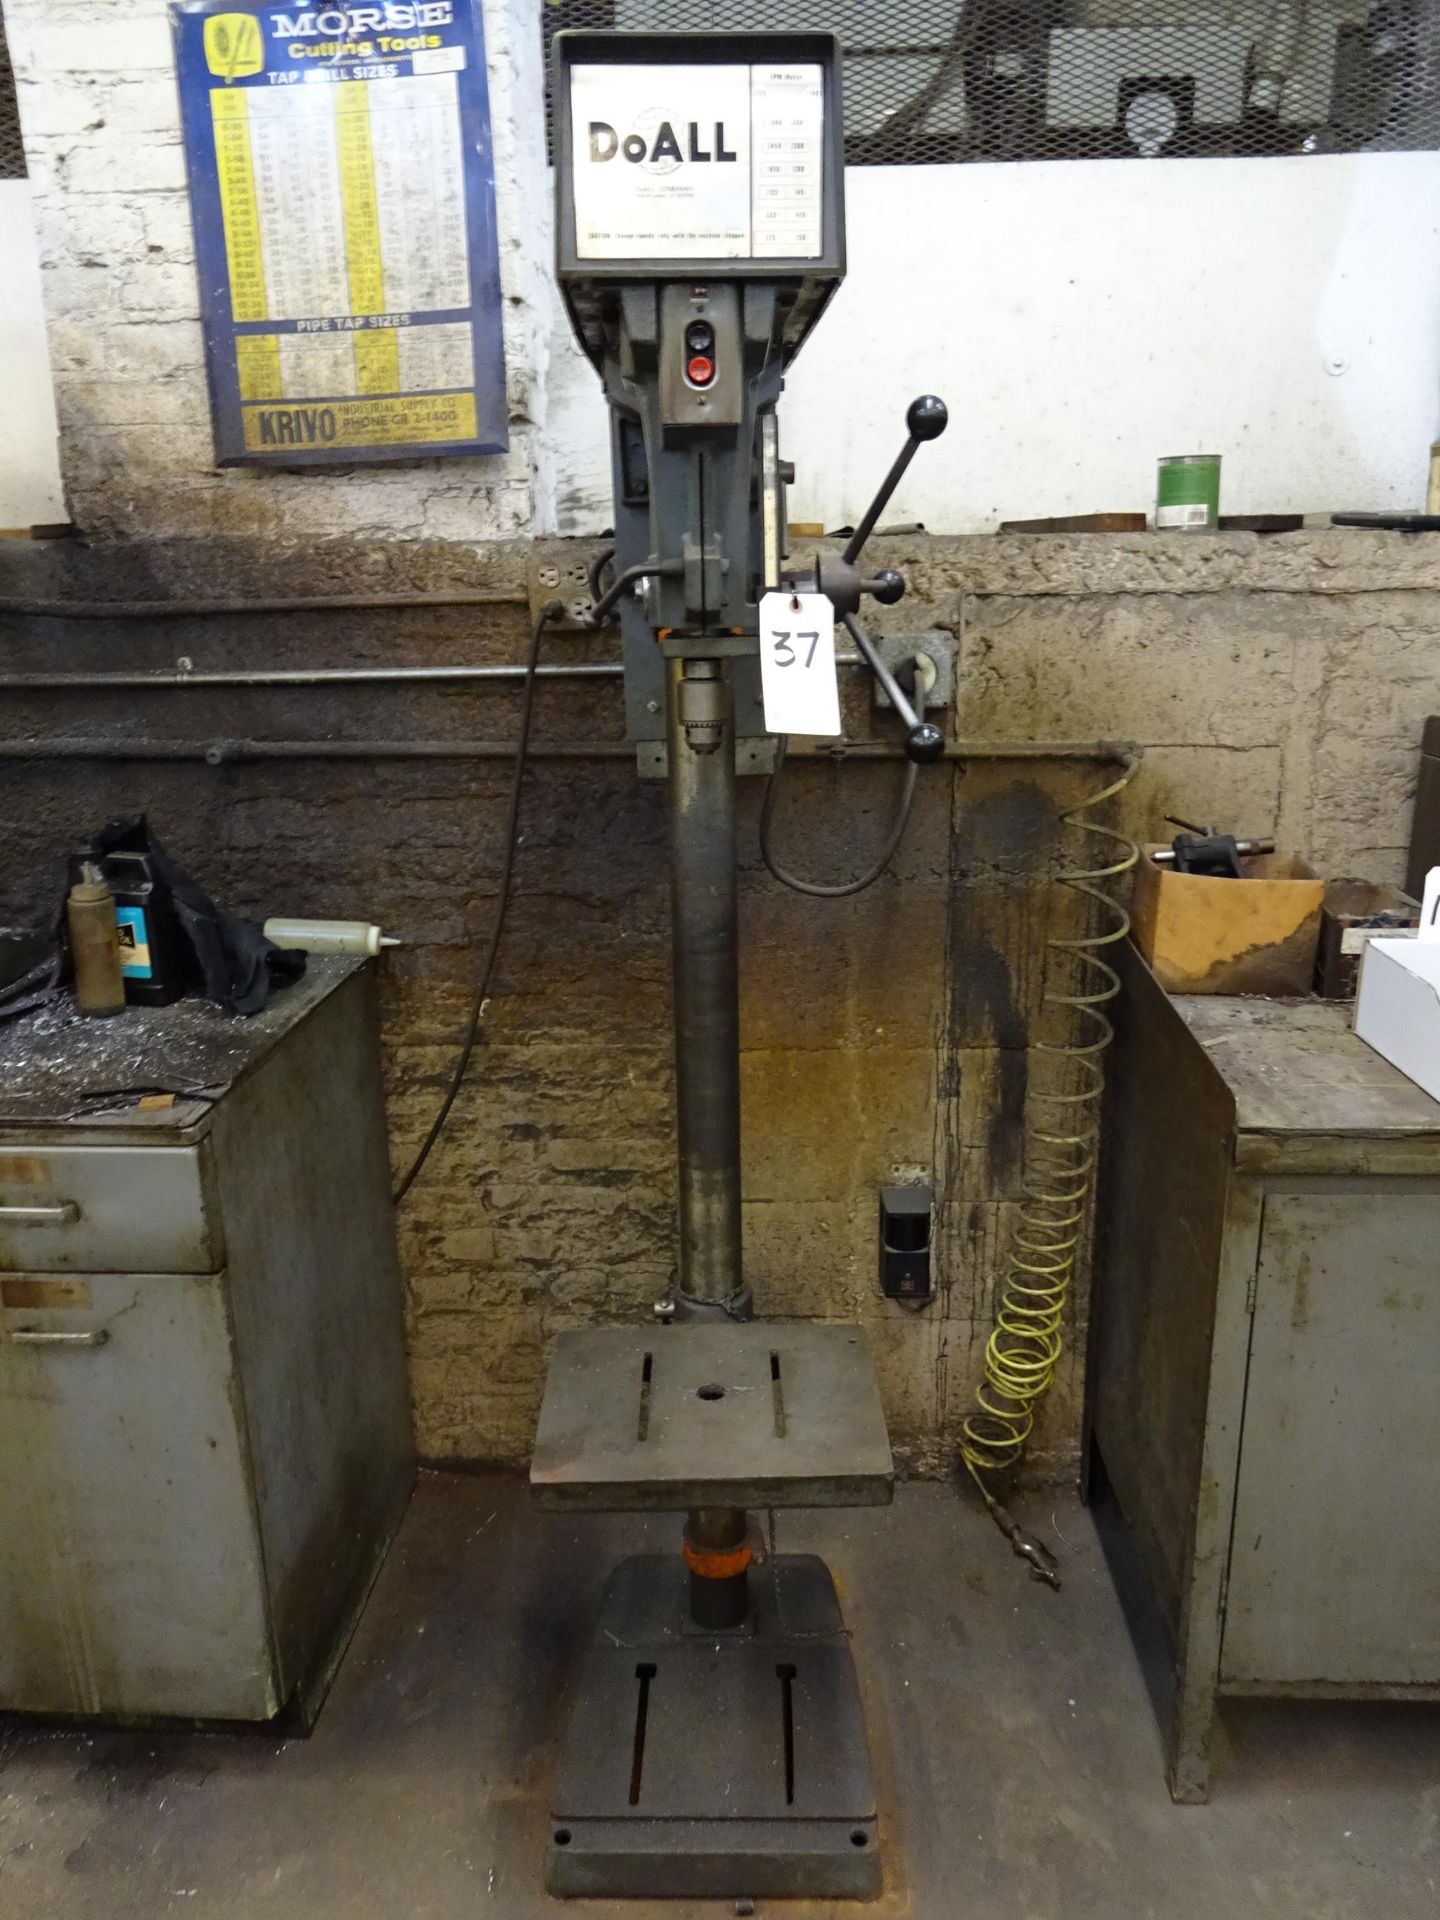 DOALL 3/4HP DRILL PRESS, S/N 504100, 250-5000 RPM - Image 2 of 2